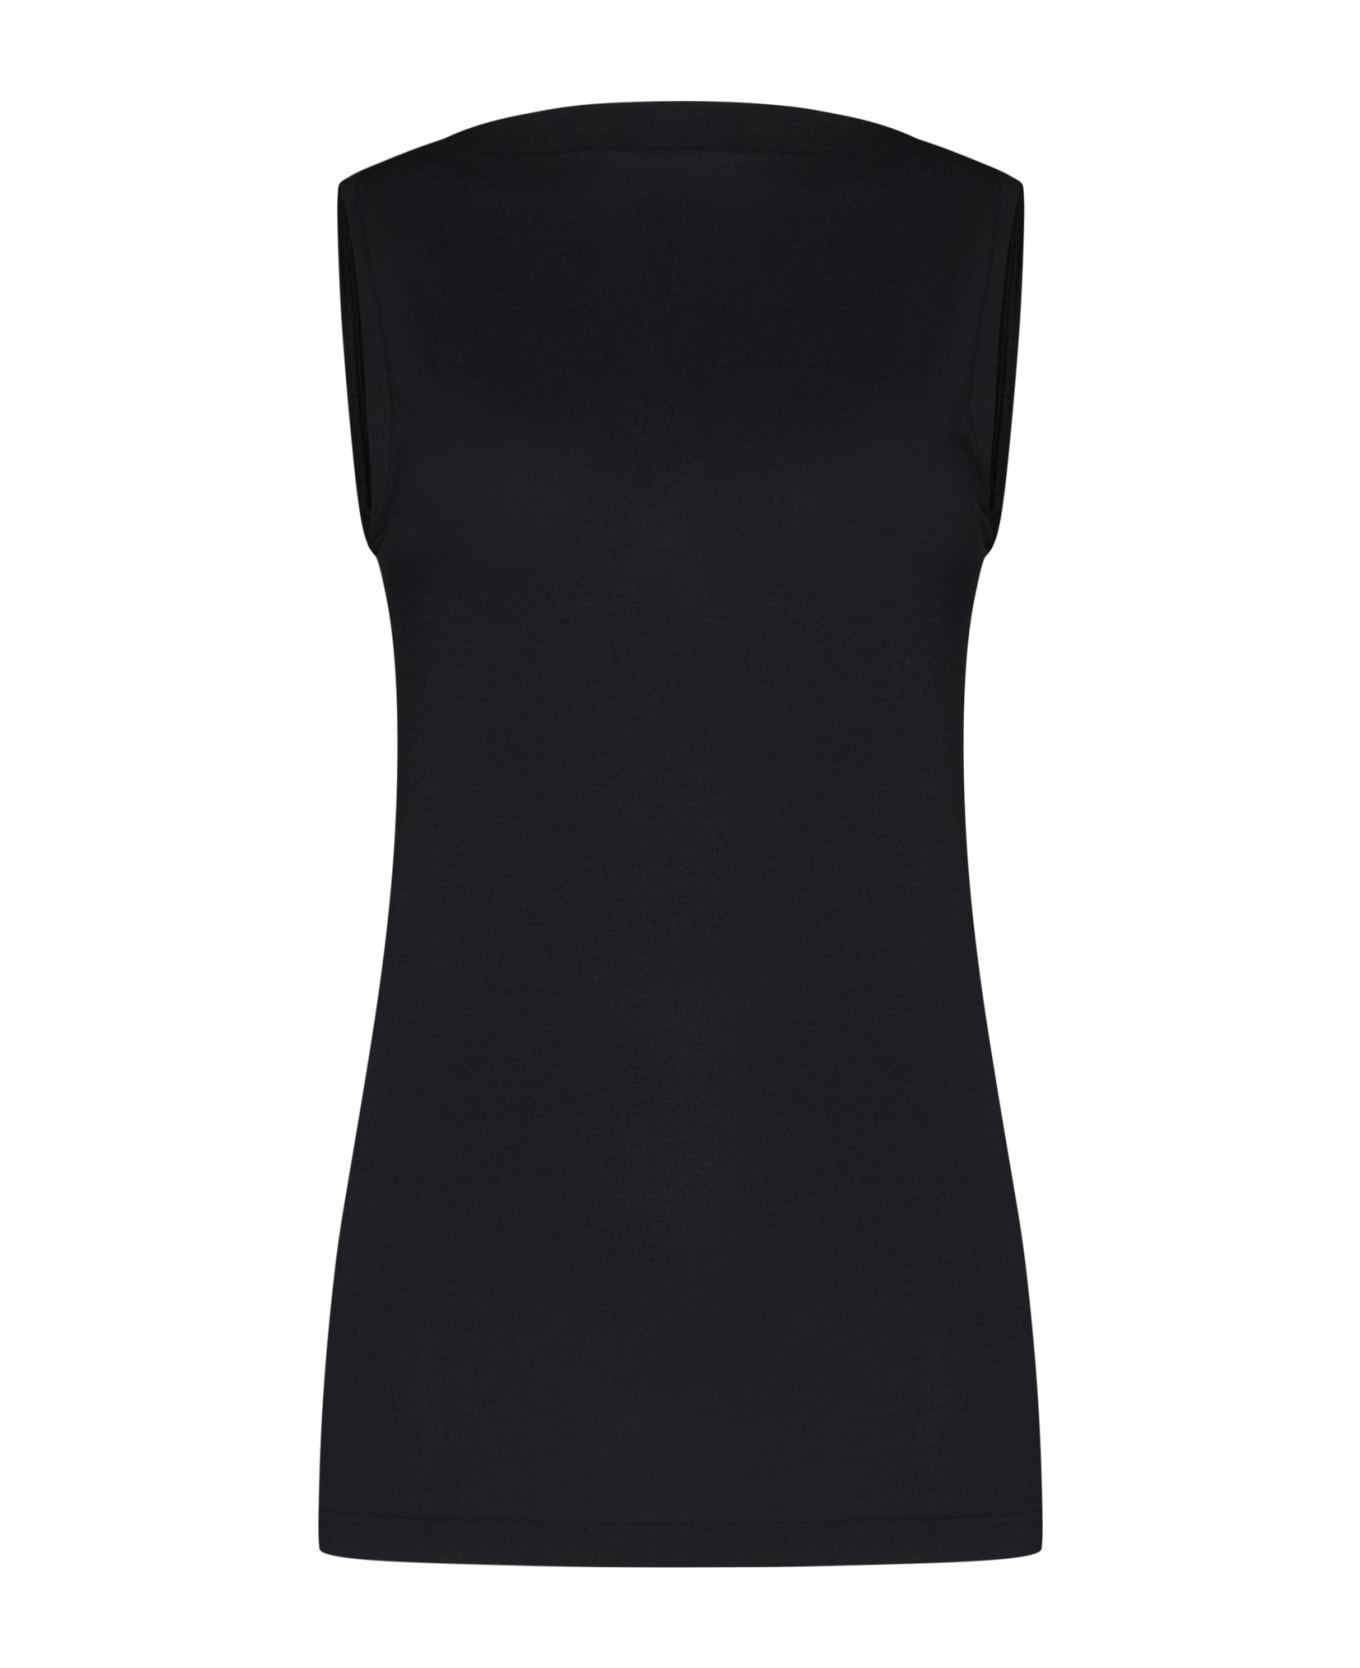 Wolford Top - Black トップス